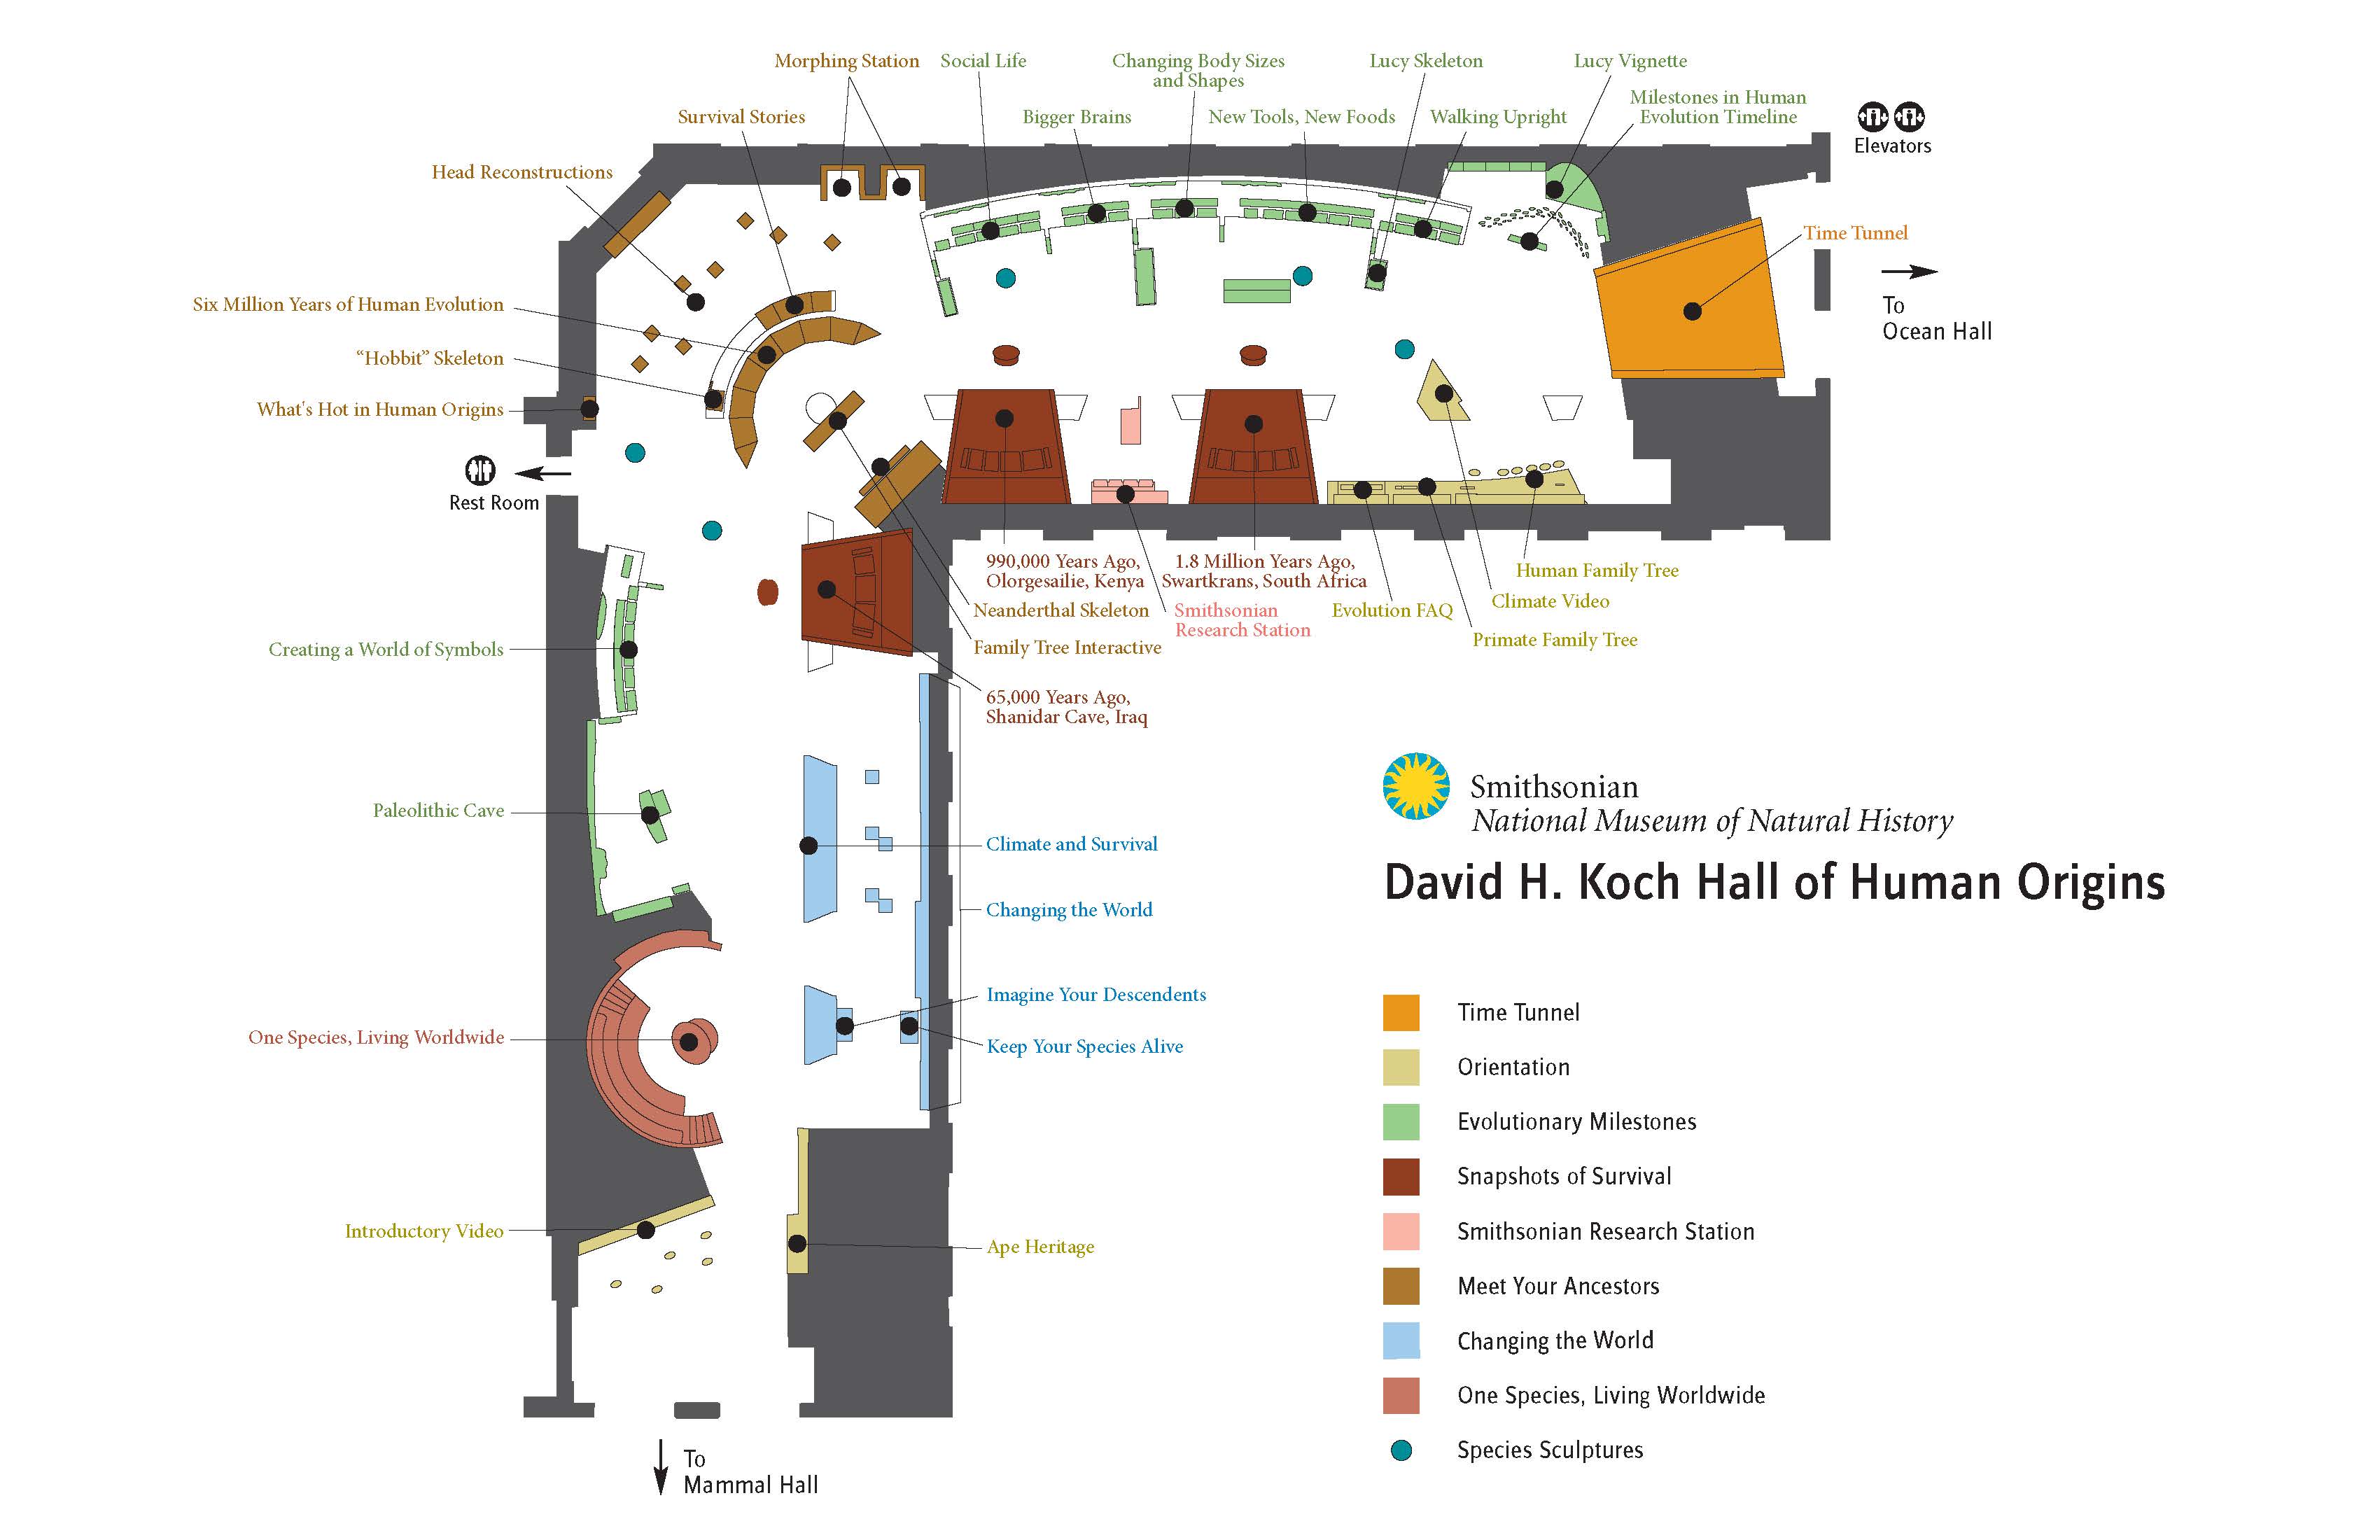 Map of the David H. Koch Hall of human origins exhibit at the Smithsonian Museum of Natural History